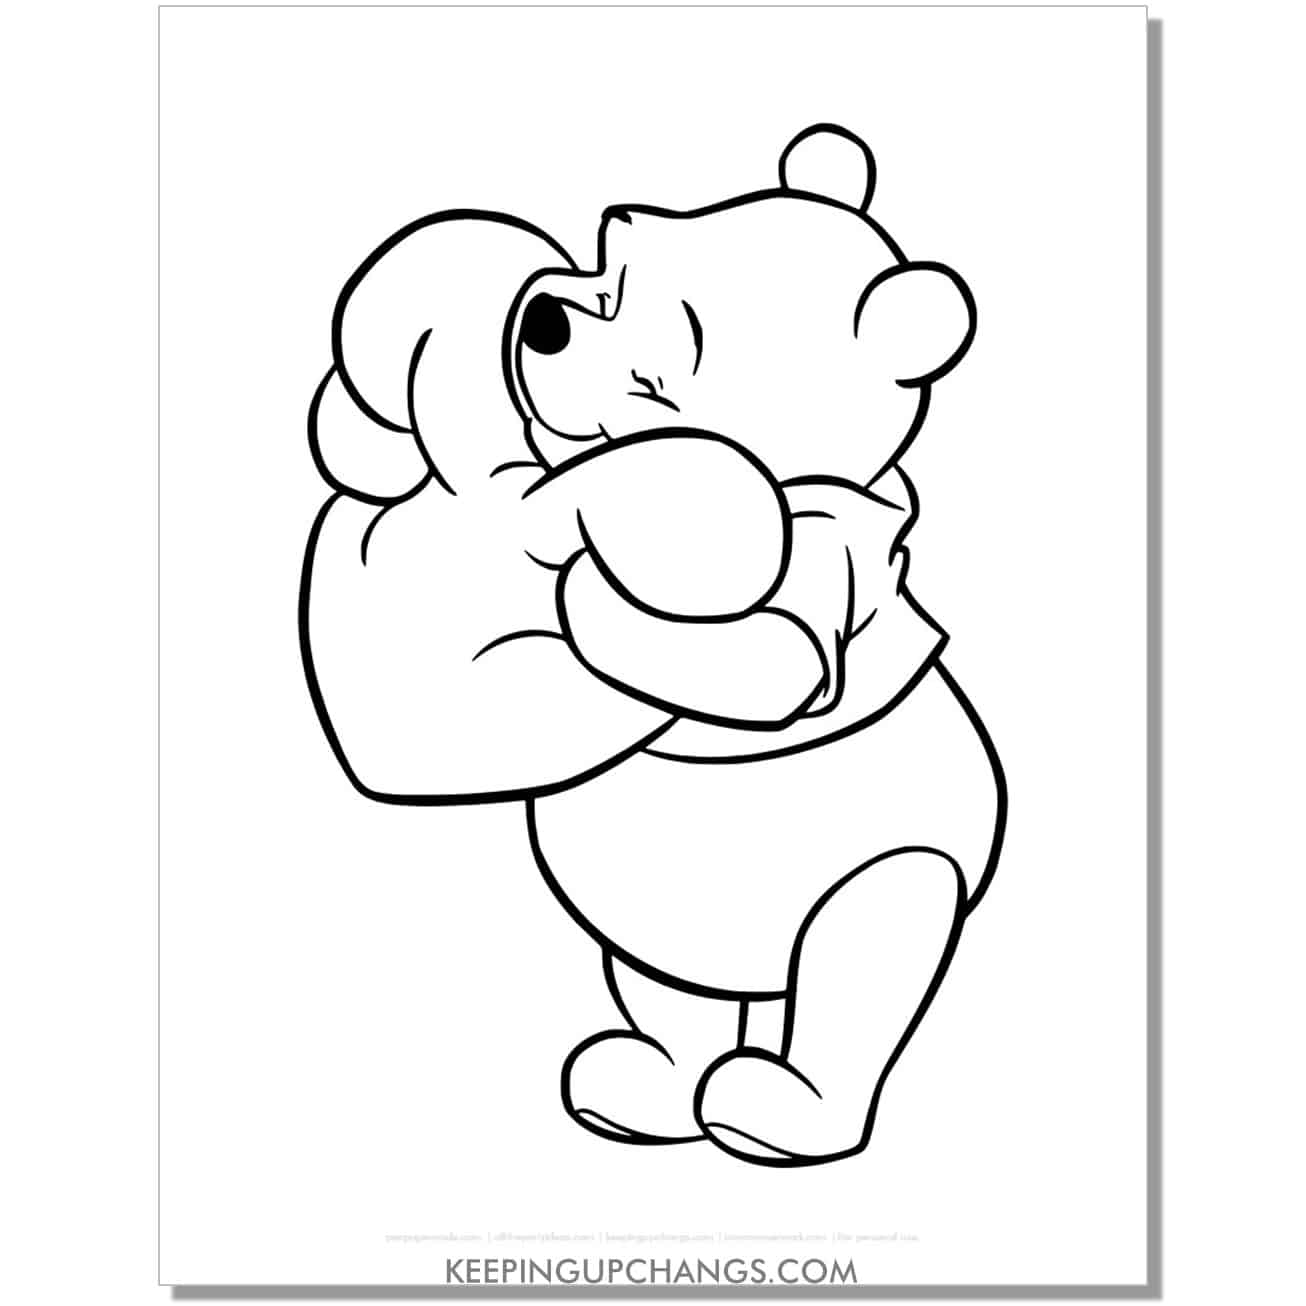 winnie the pooh hugging heart pillow coloring page, sheet.